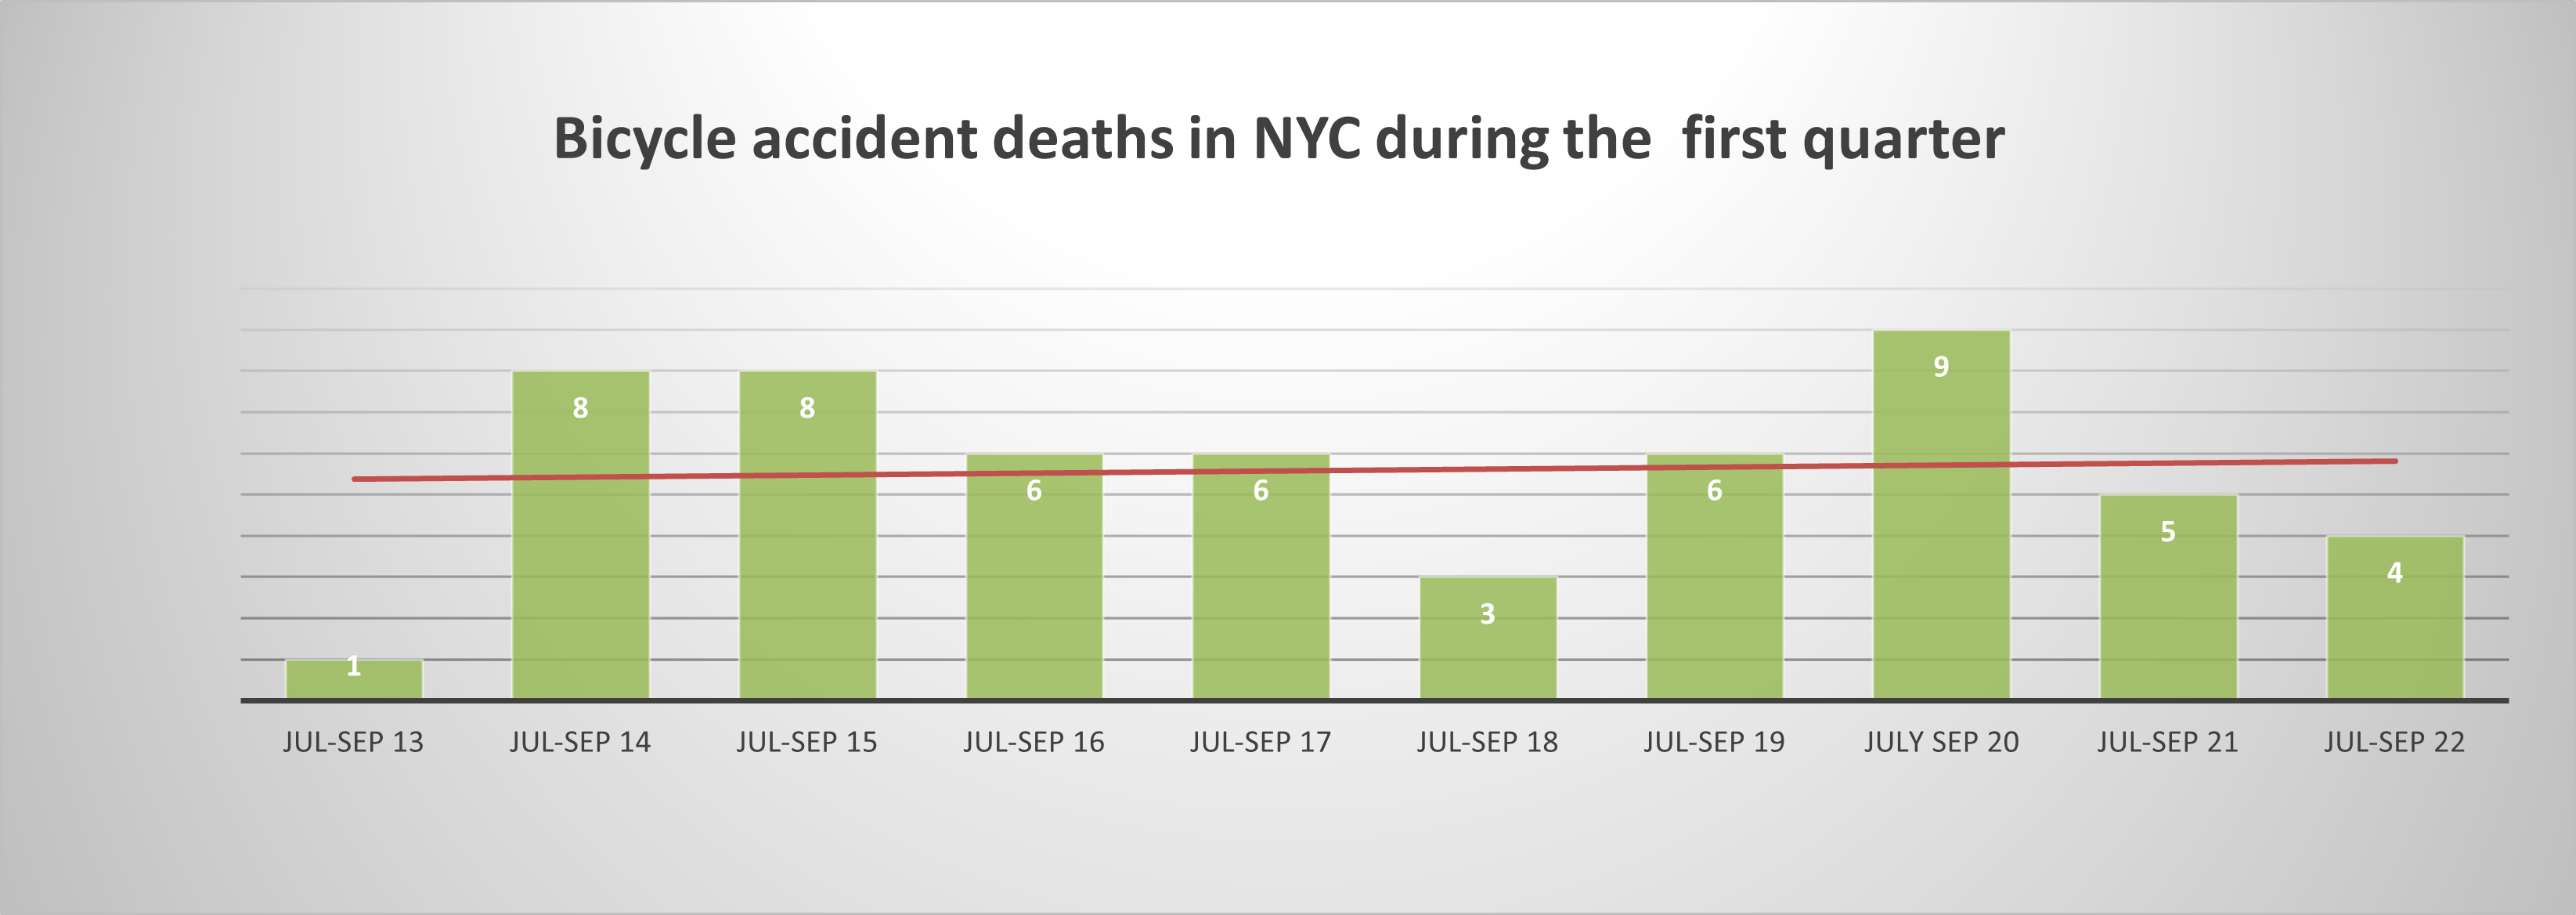 New York City Bicycle accident fatalities Q3 2022